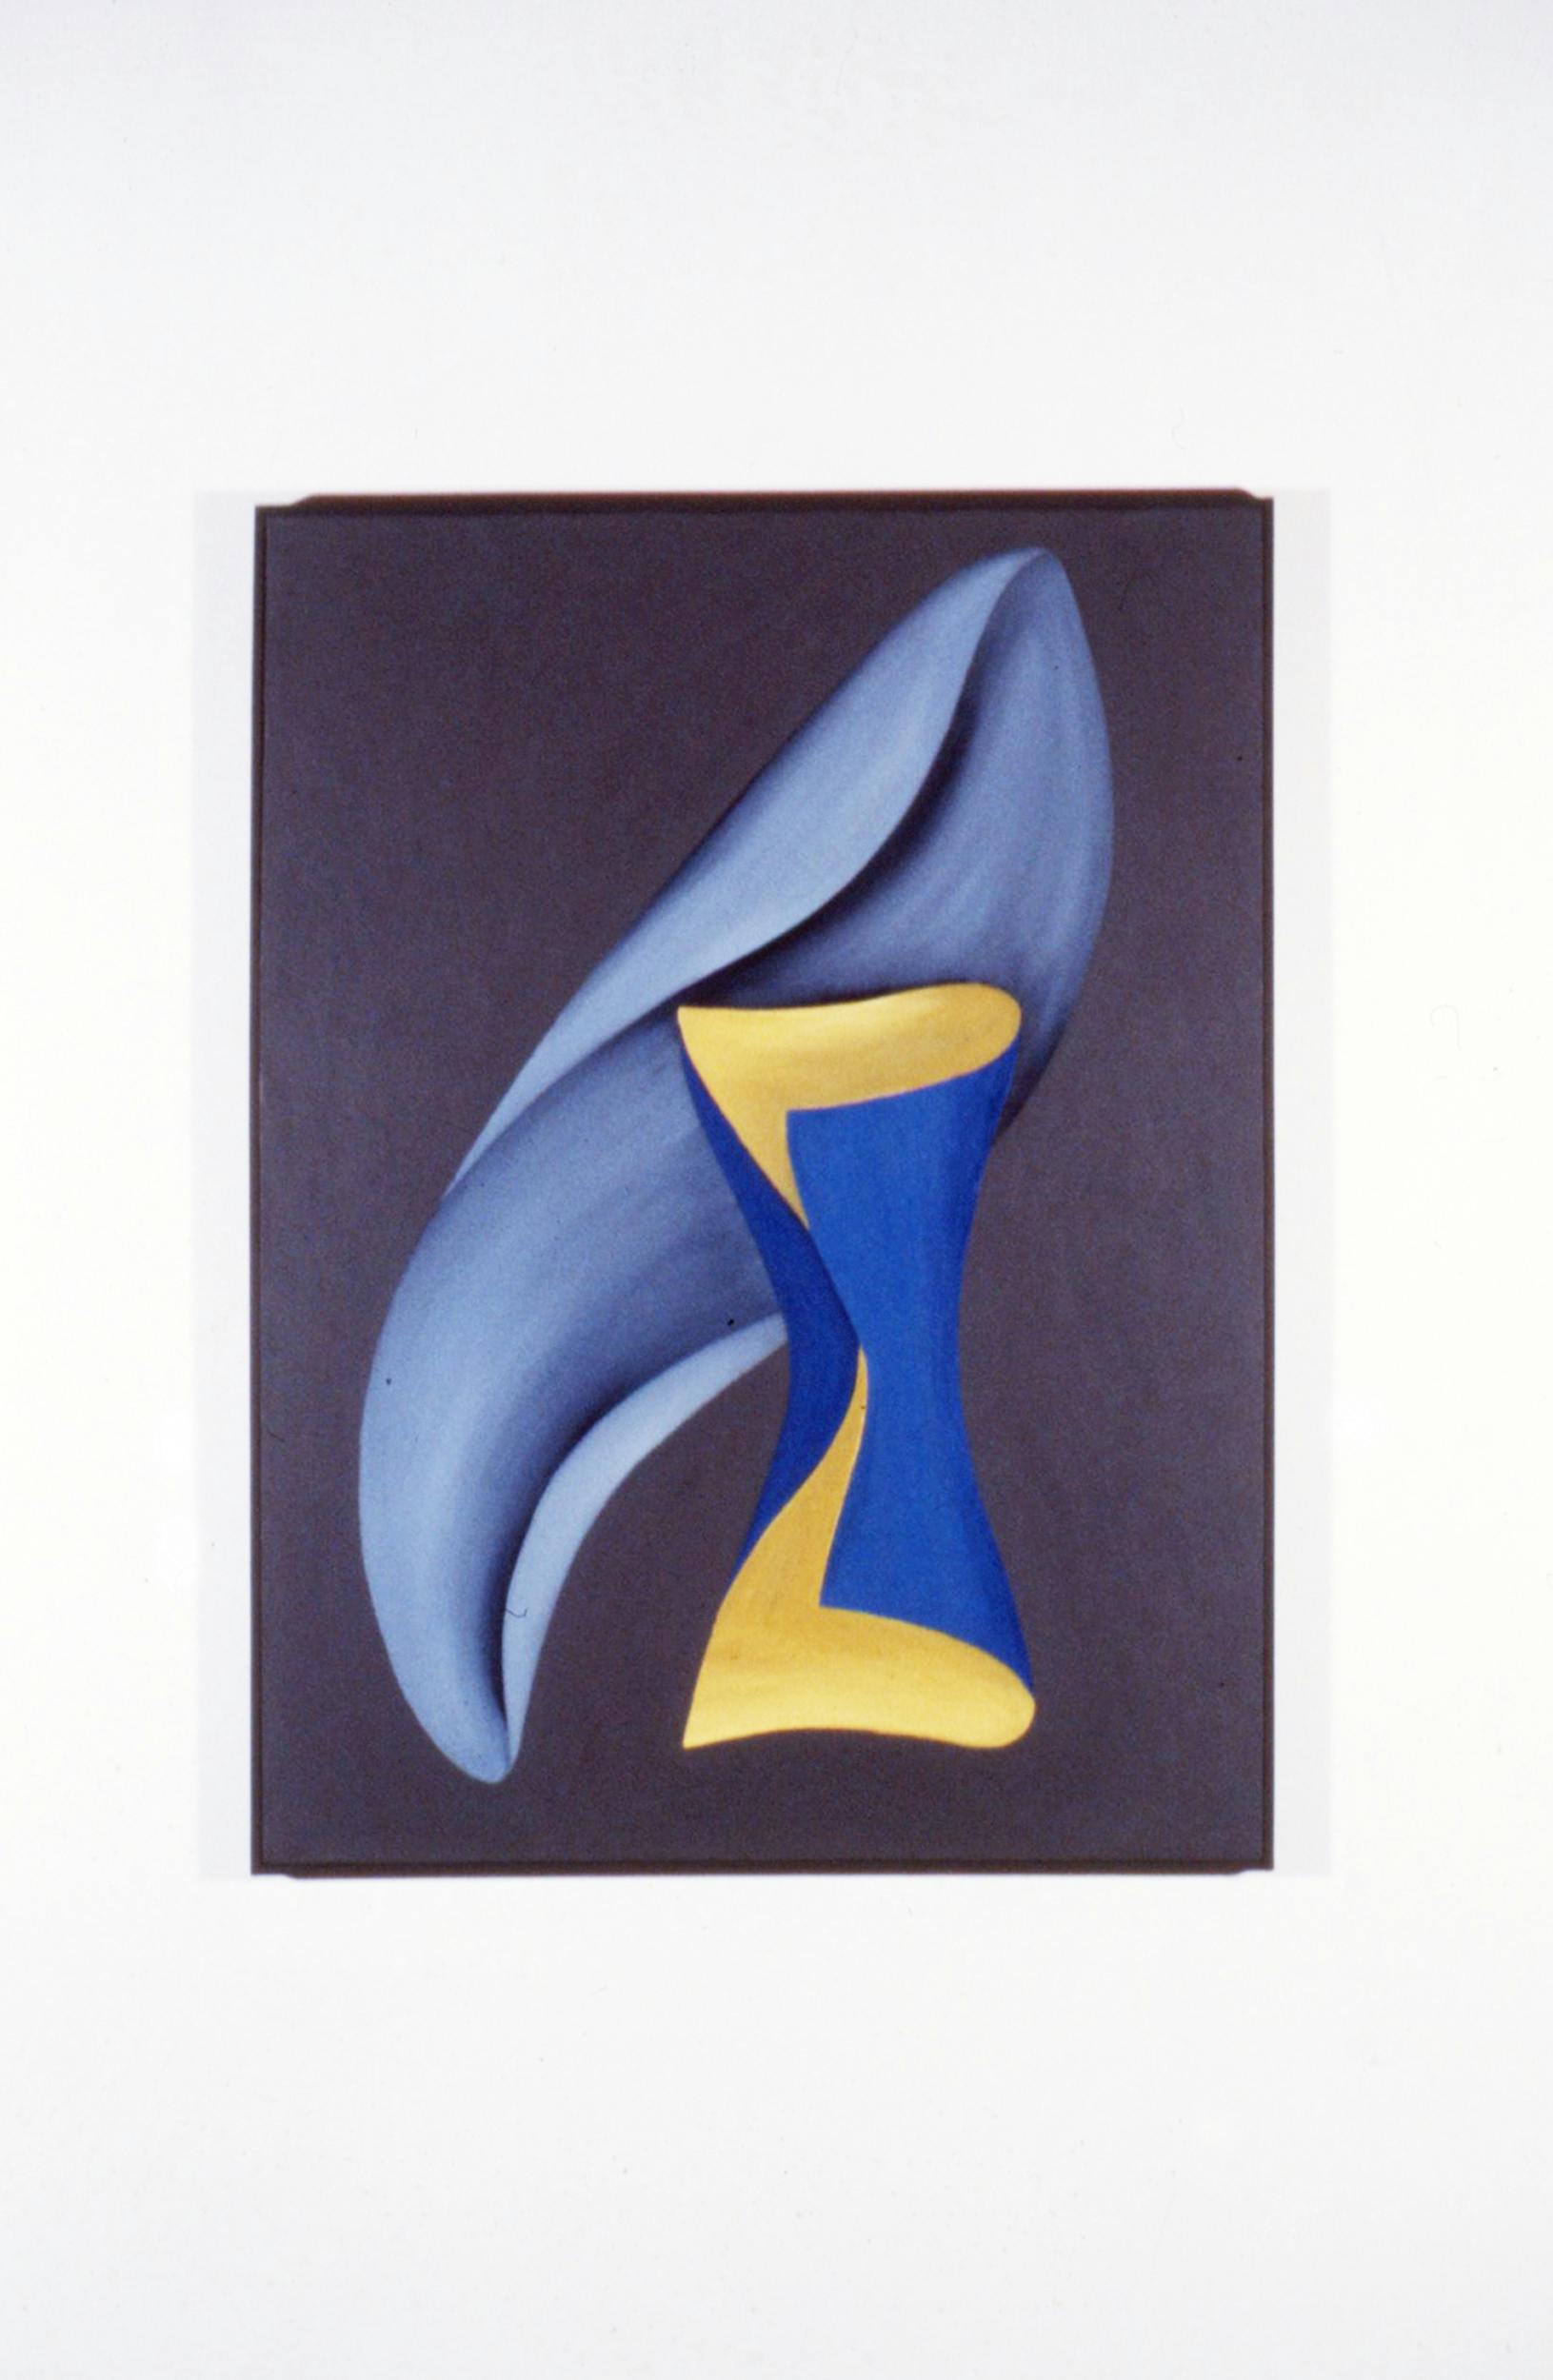 An abstract painting hangs on a gallery wall. The painting has a blue and yellow form at the centre with a solid black background. 